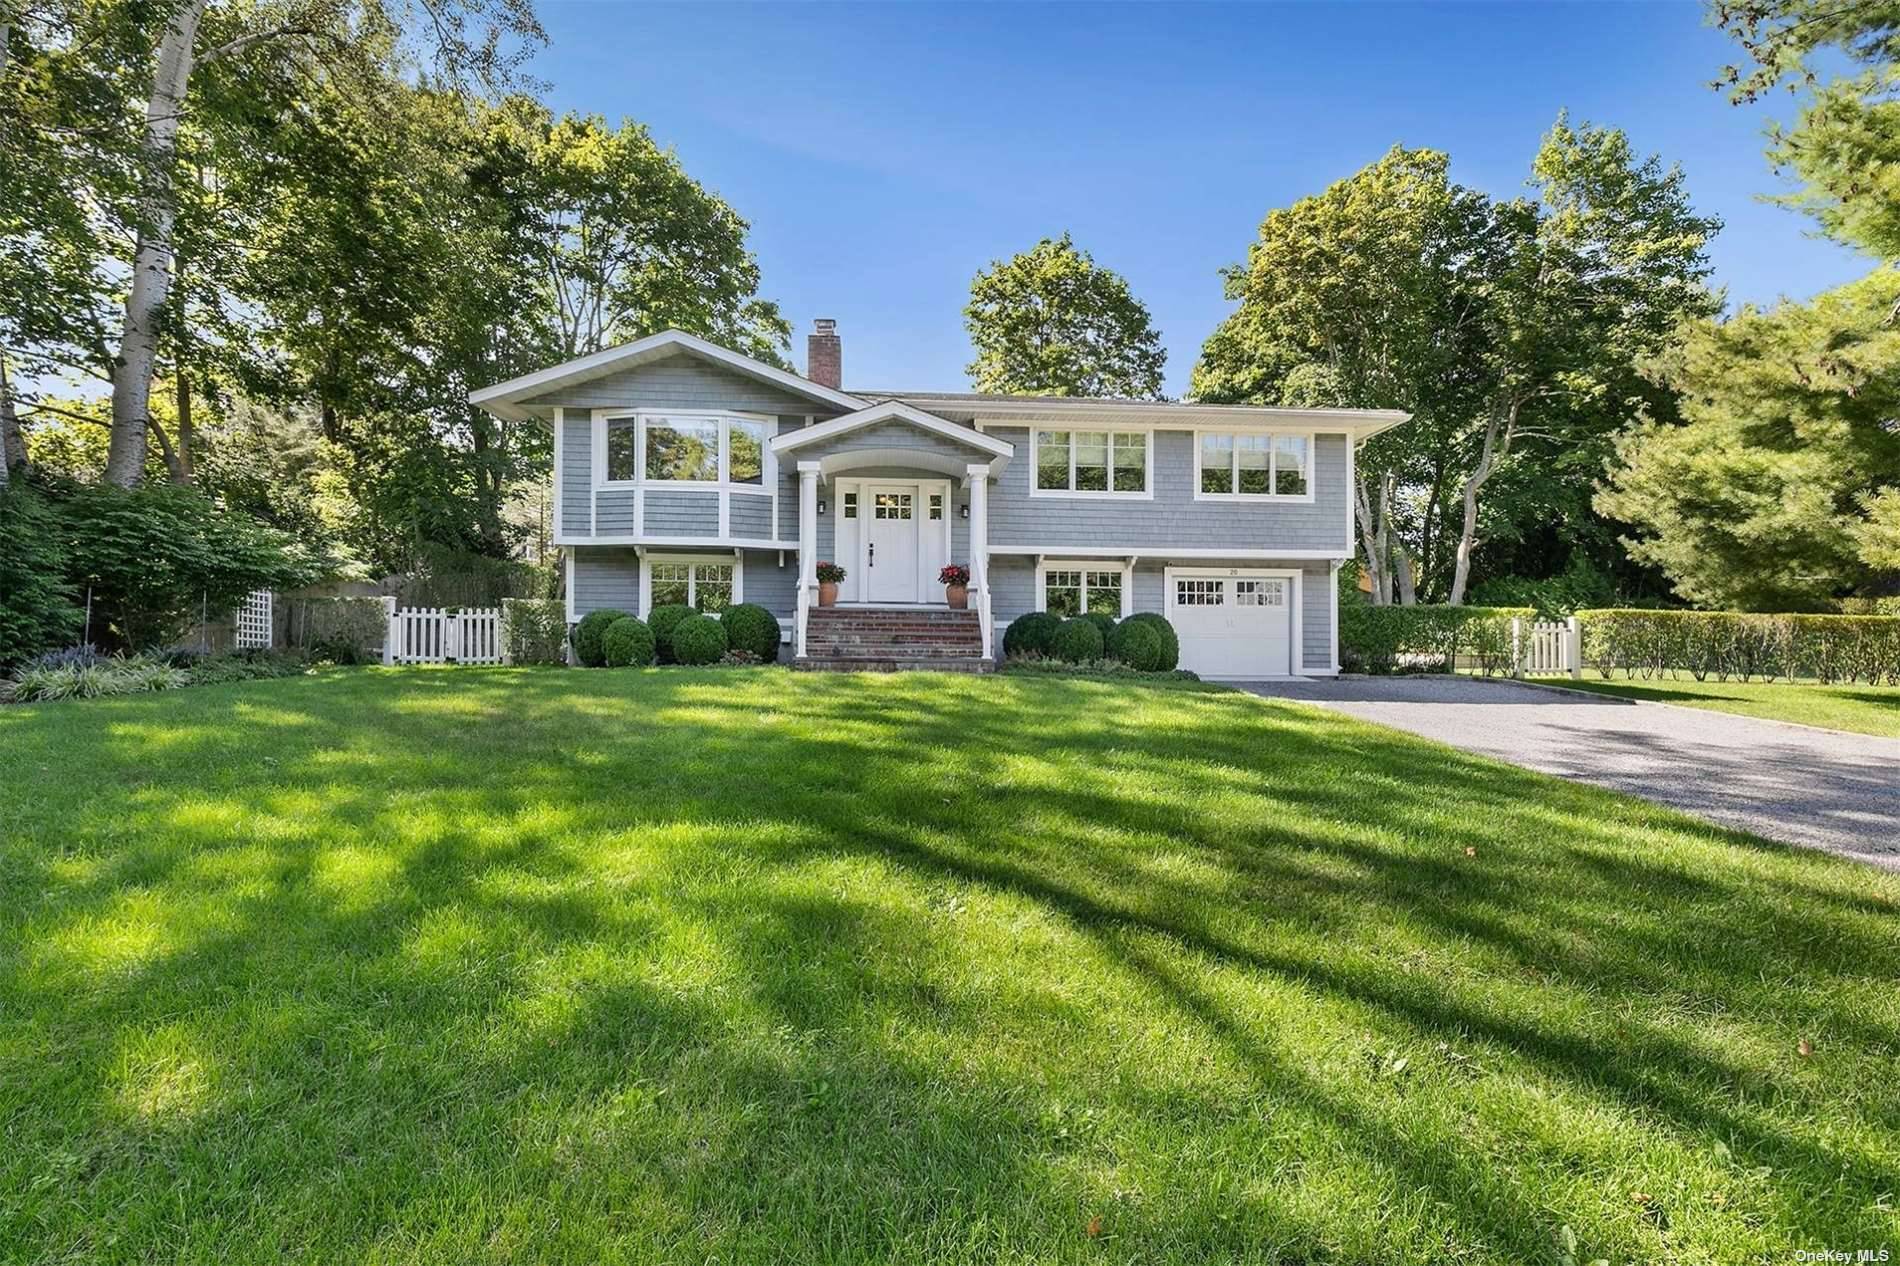 Discover the quintessential Sag Harbor lifestyle in this spacious and meticulously maintained home, ideally situated in the coveted Historic District.